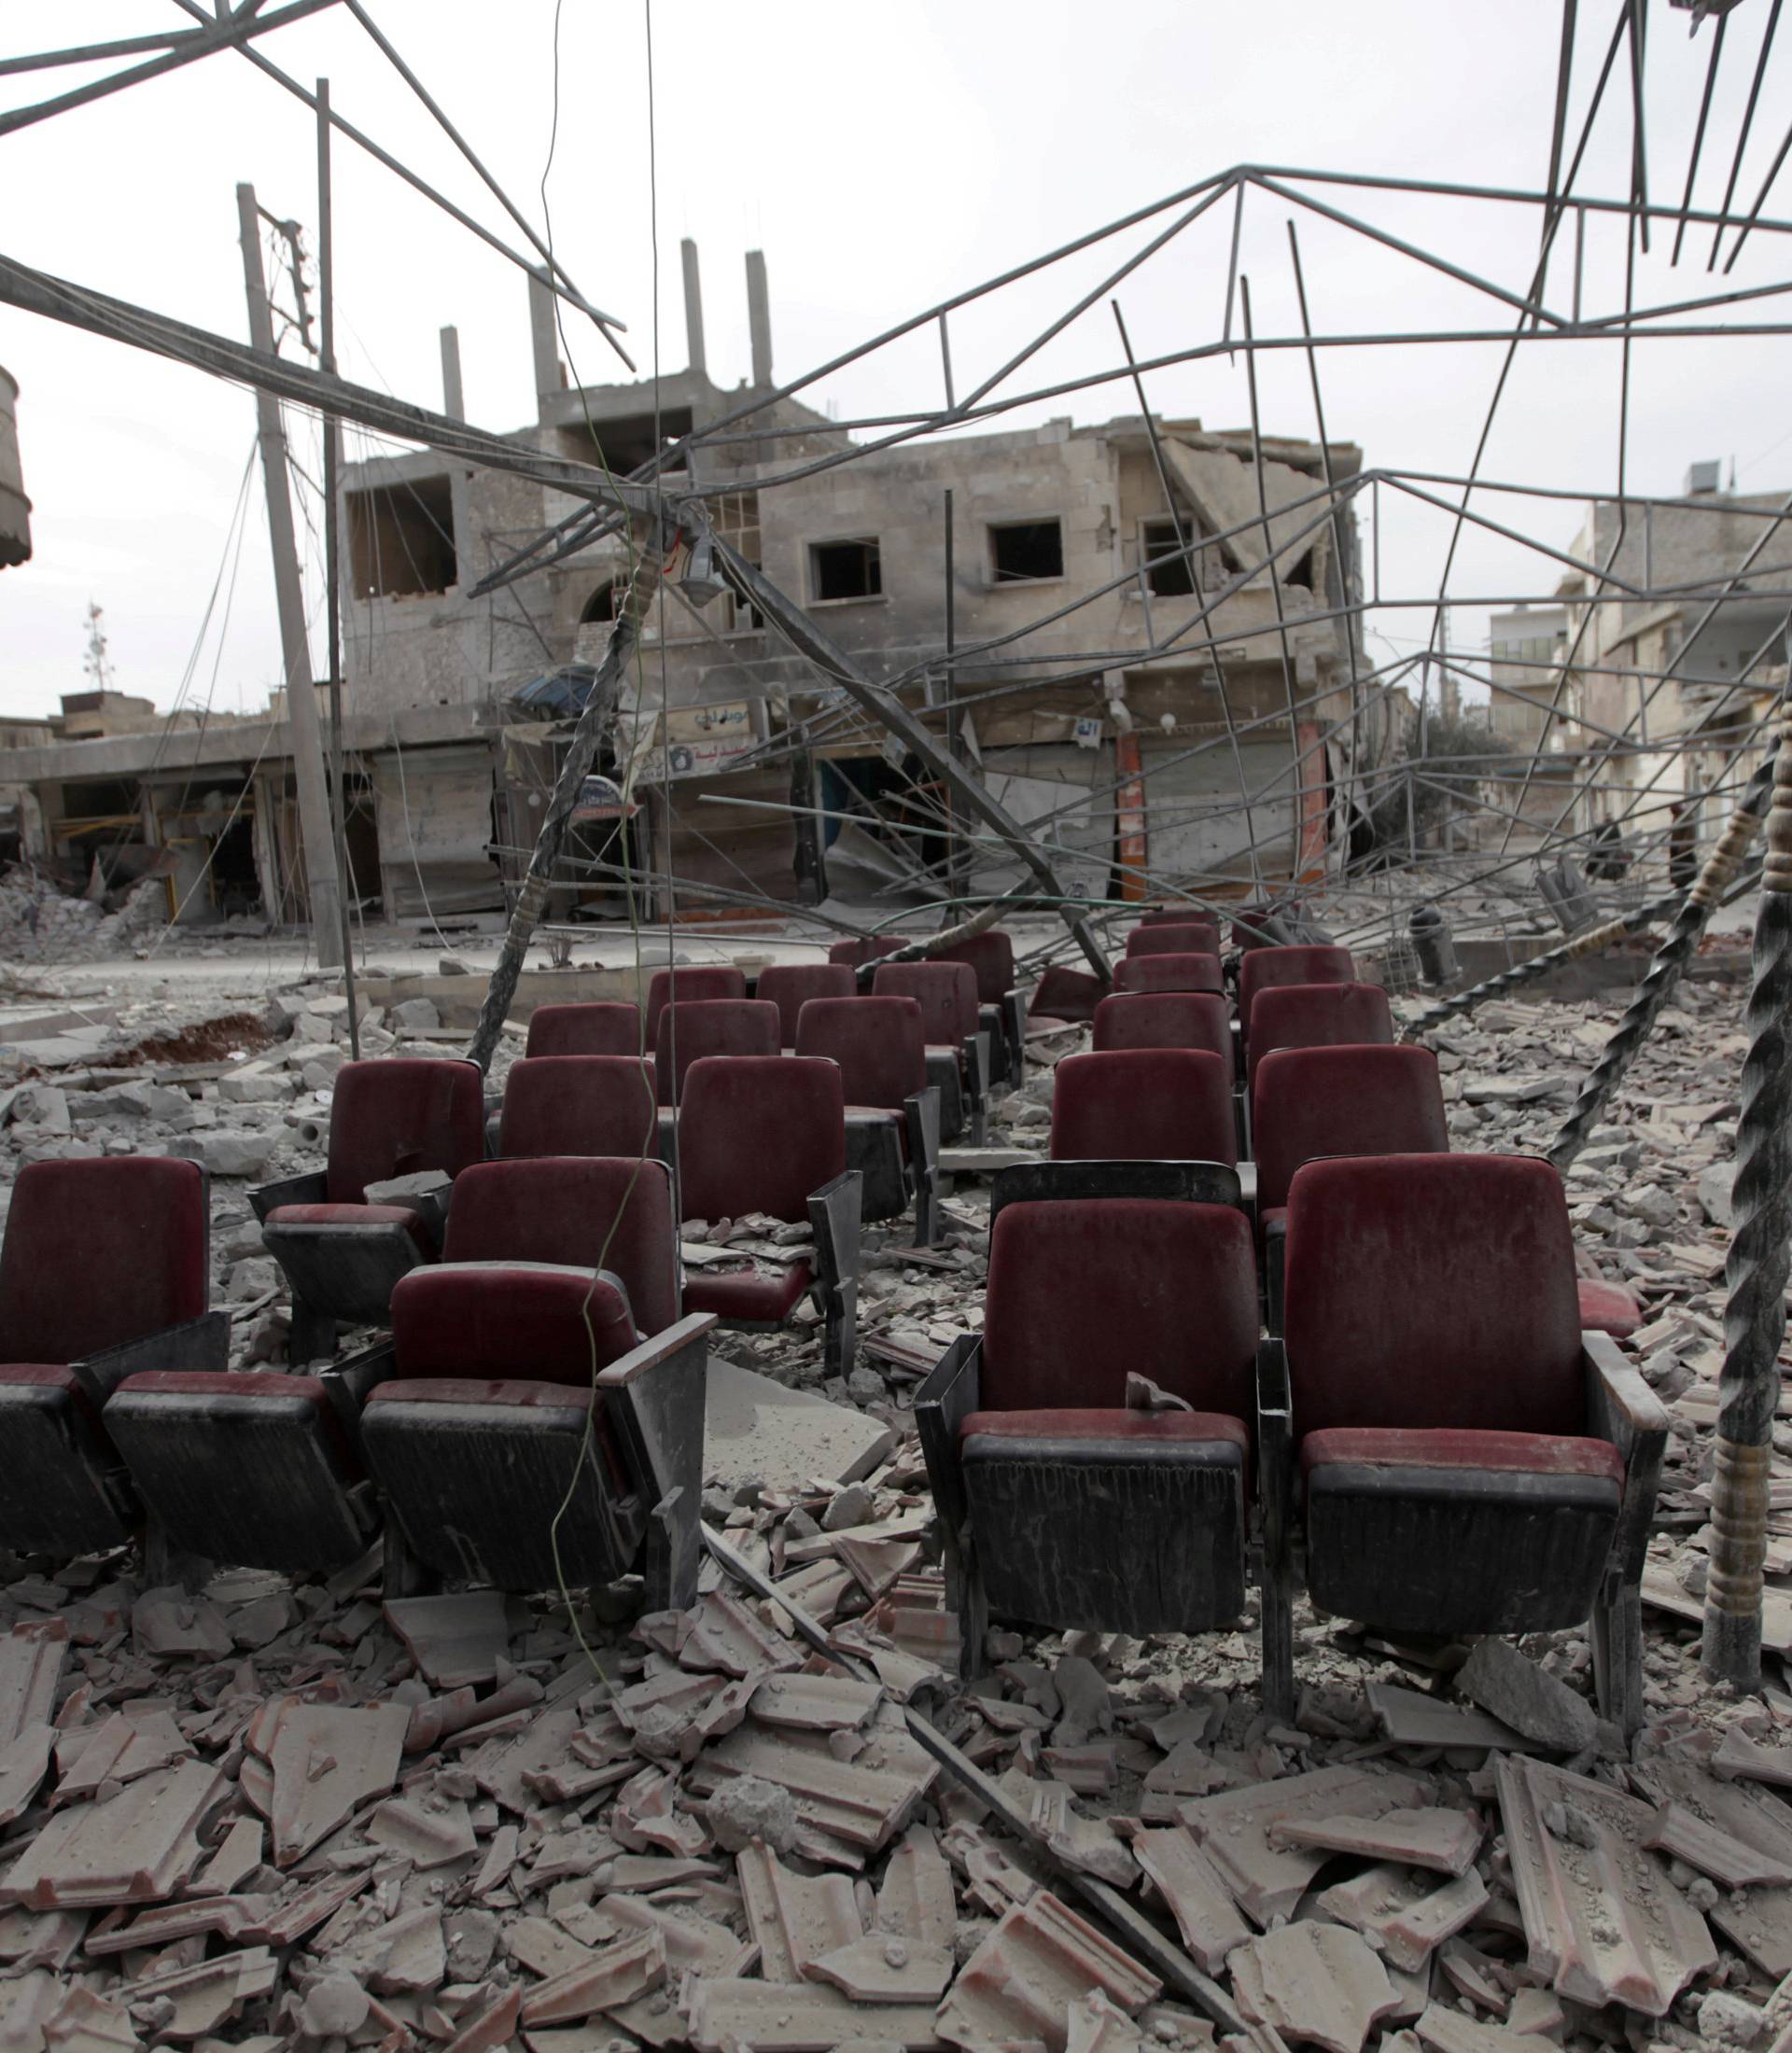 Damaged seats are pictured amidst rubble of buildings in the northern Syrian town of al-Bab